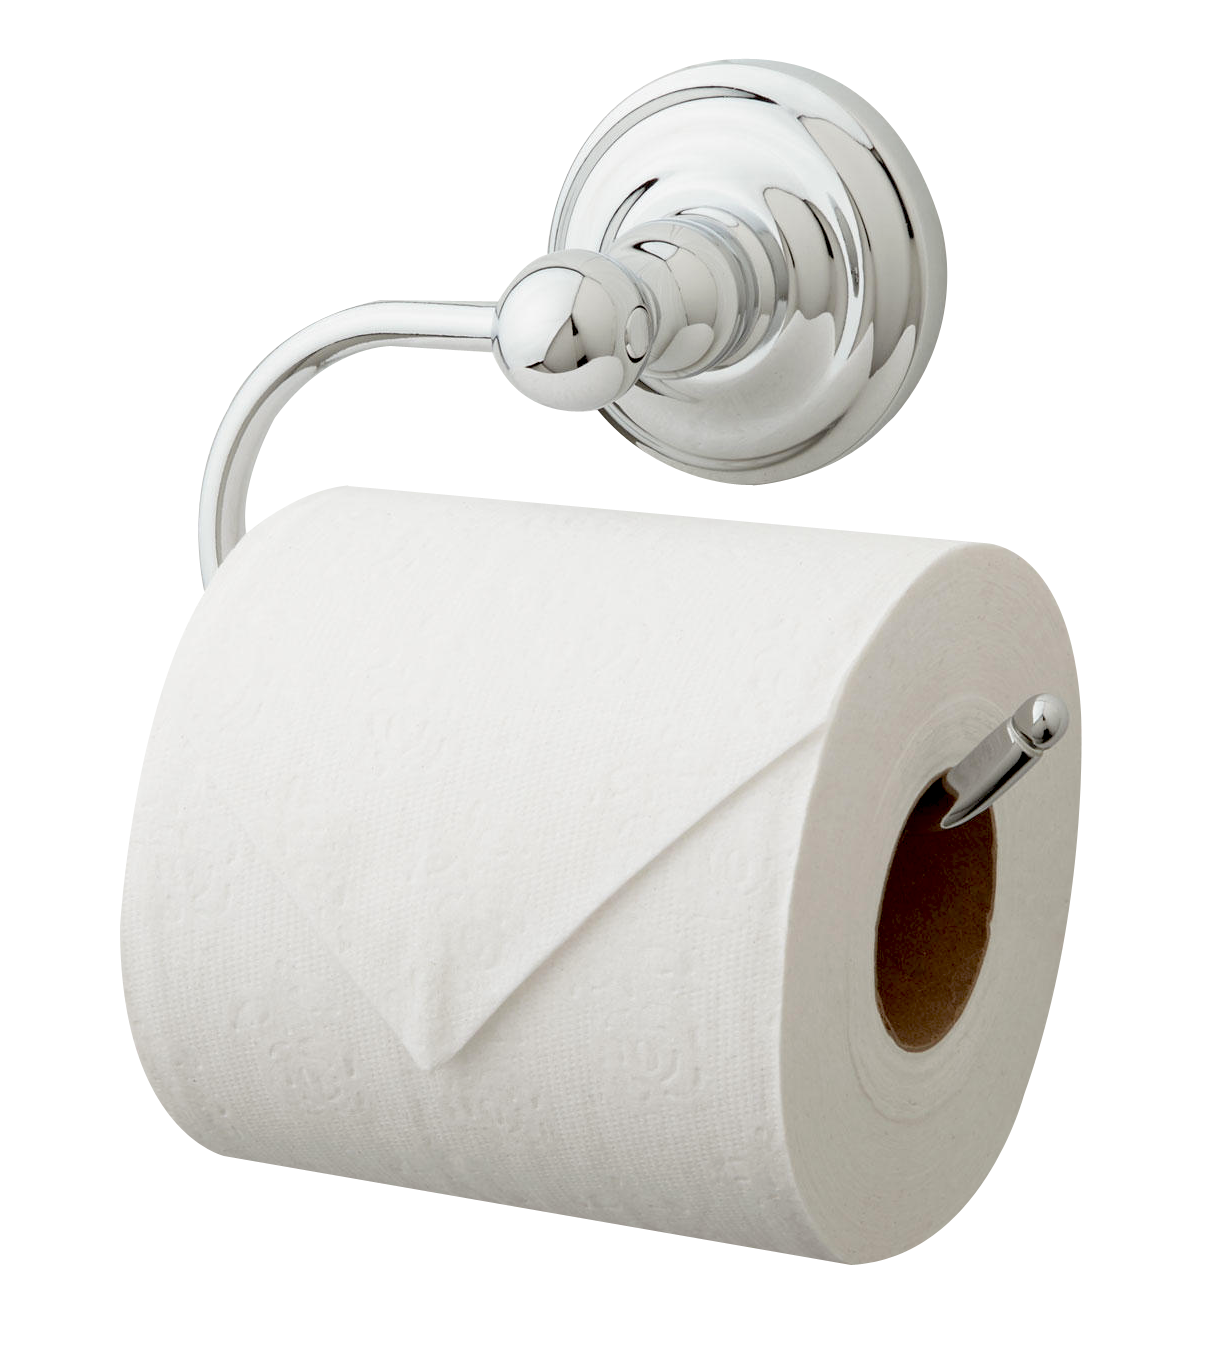 A Roll Of Toilet Paper On A Metal Holder